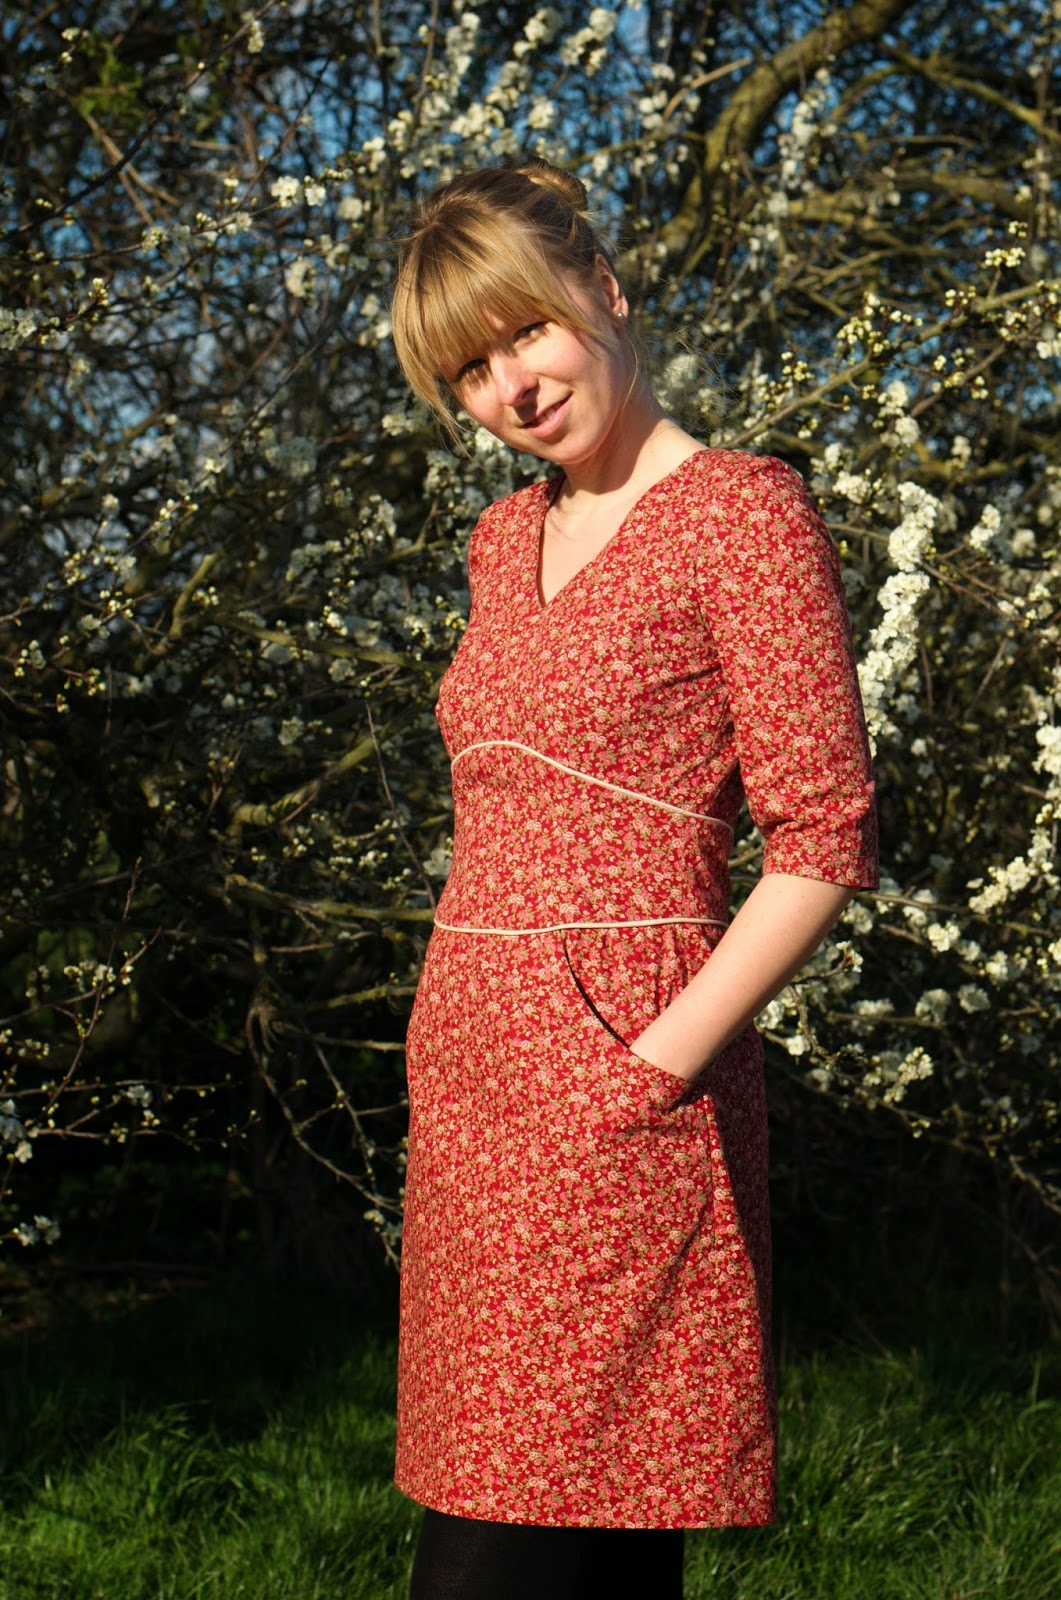 Ela Sews And Doesn't Sleep: Simplicity 1882: The finished dress!